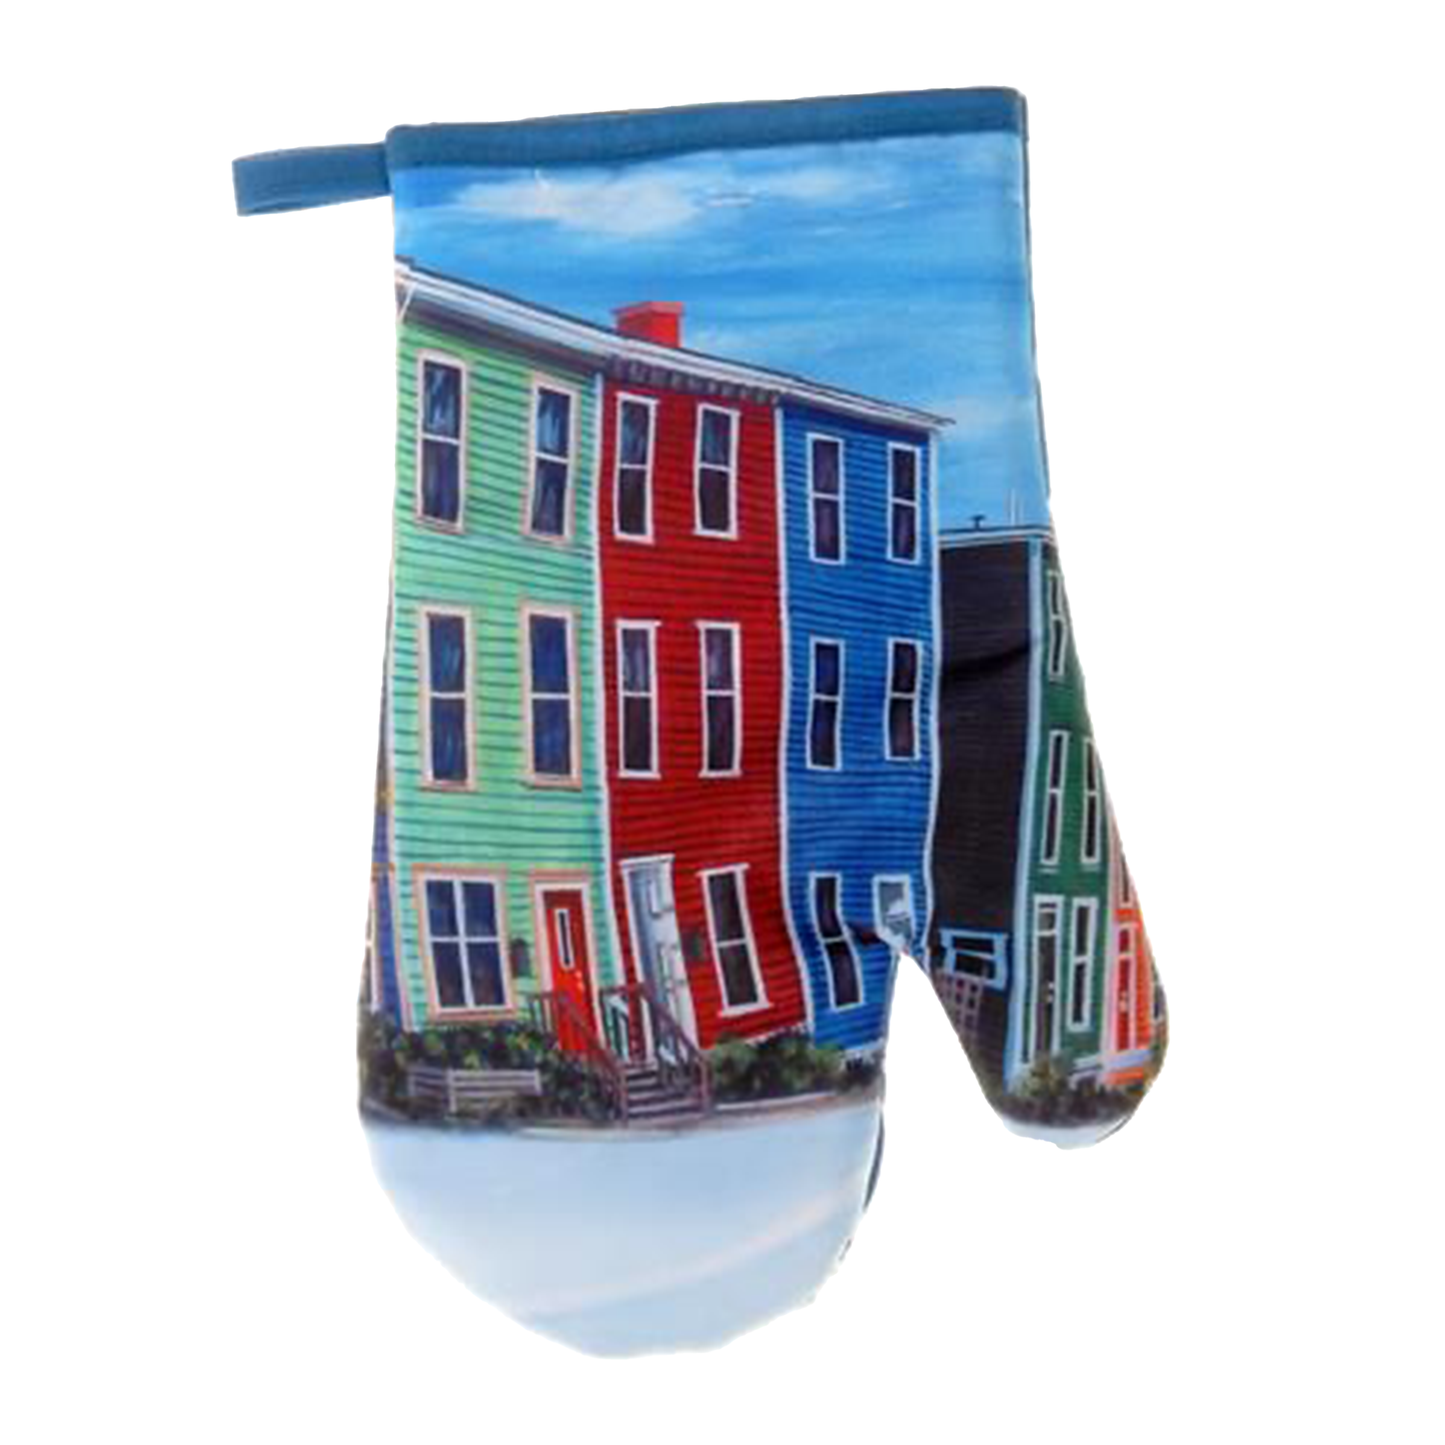 Oven Mitts from Newfoundland